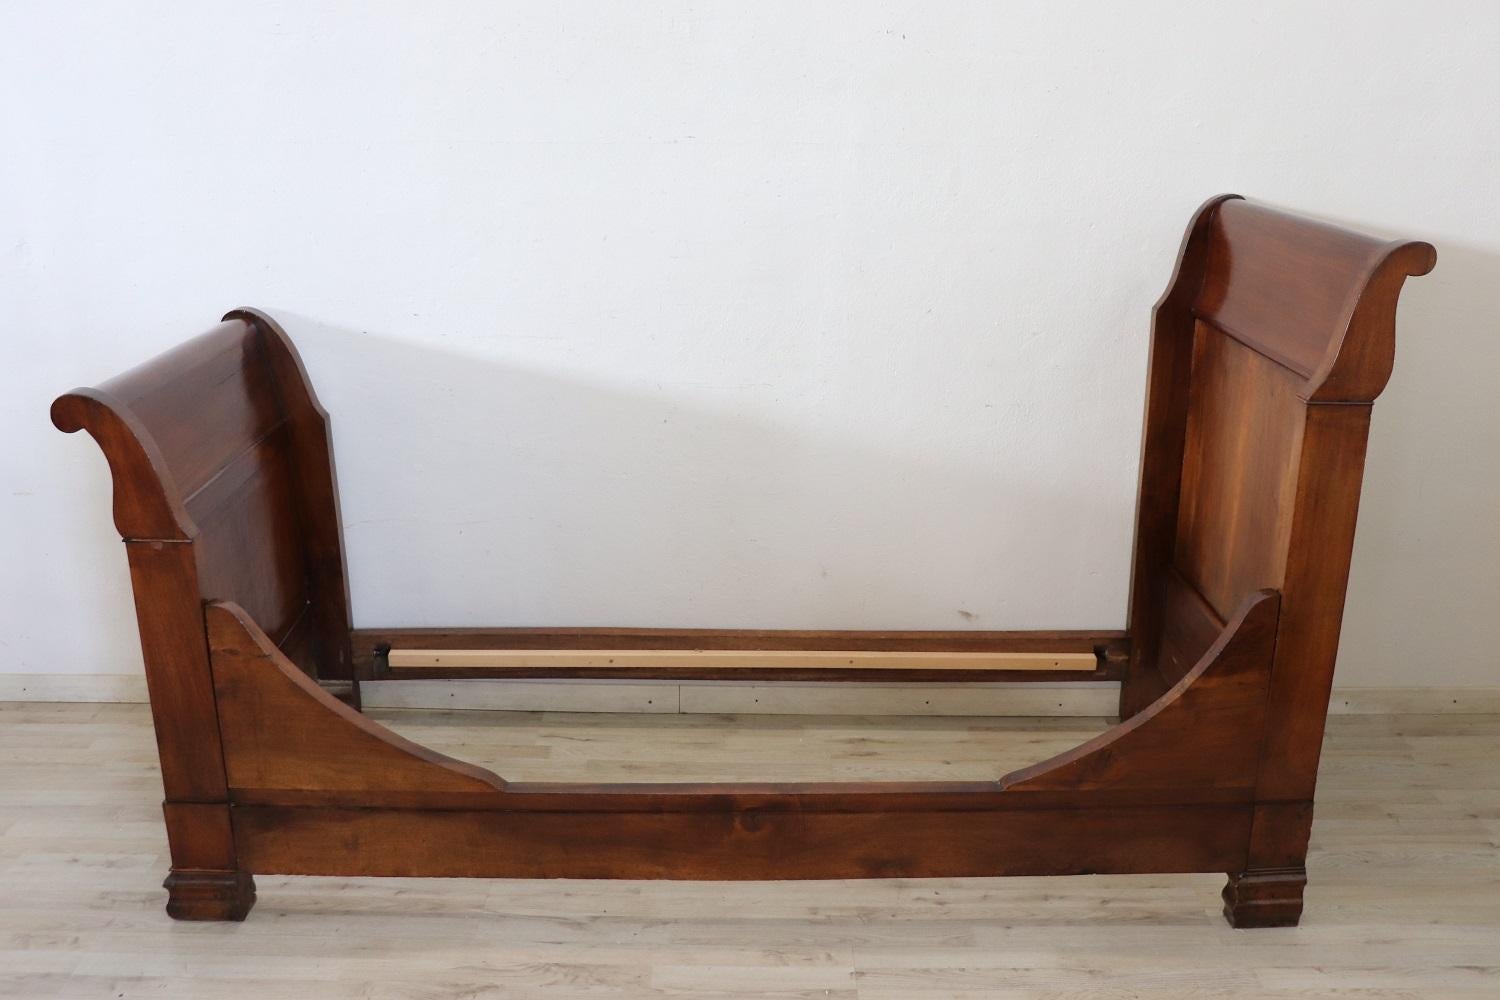 Rare Italian of the period Louis Philippe antique single bed, 1845. This type of bed is called 